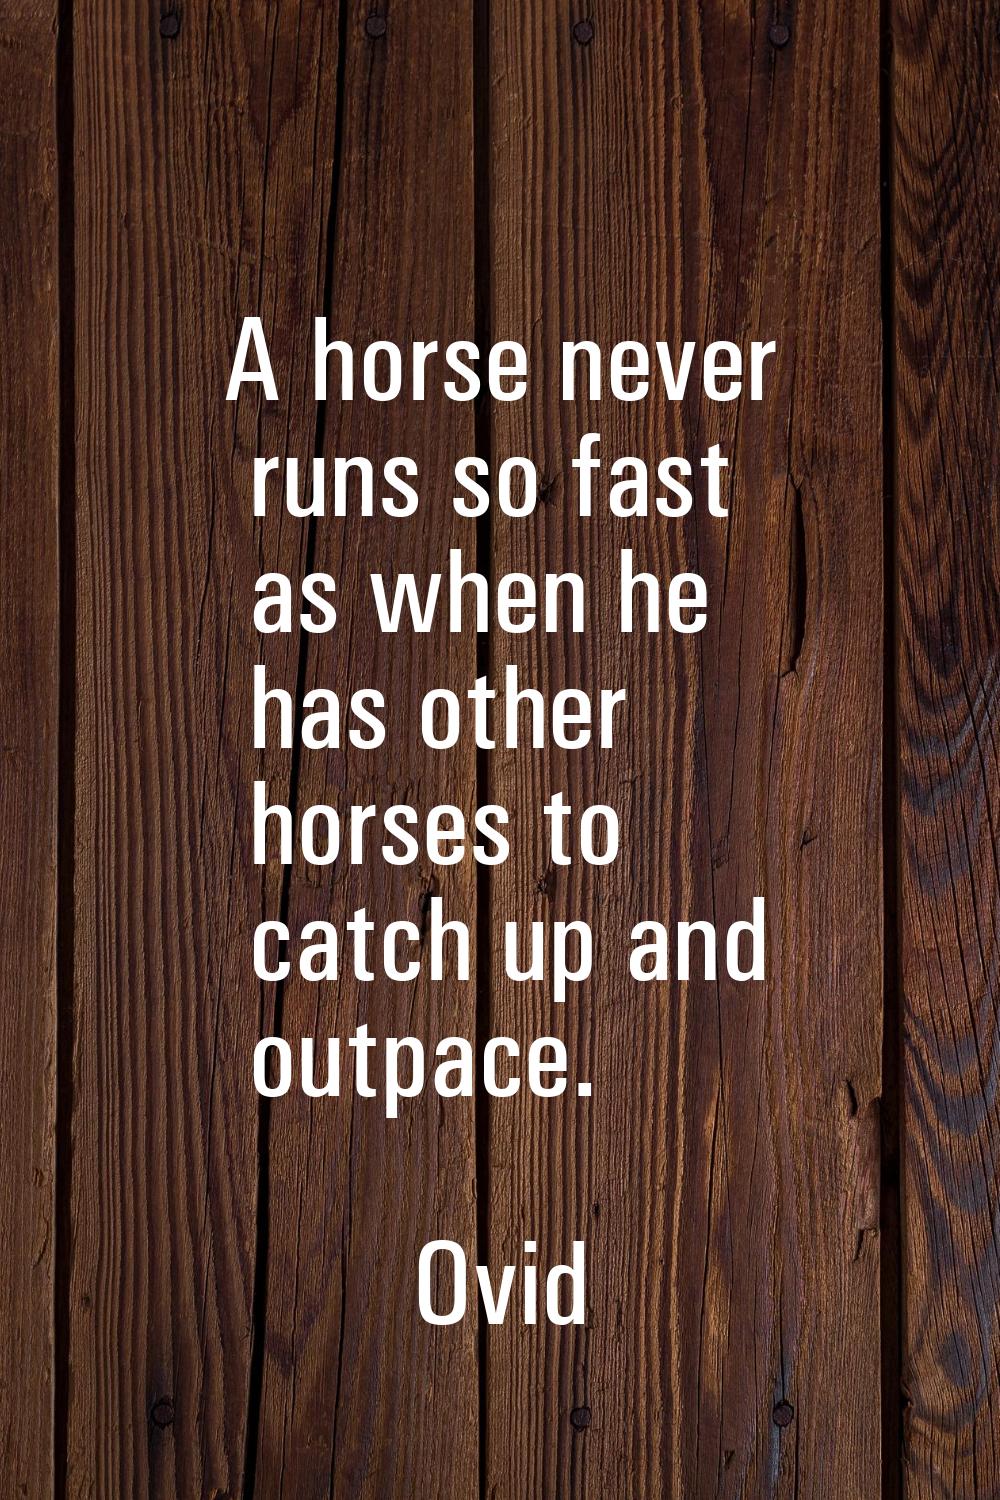 A horse never runs so fast as when he has other horses to catch up and outpace.